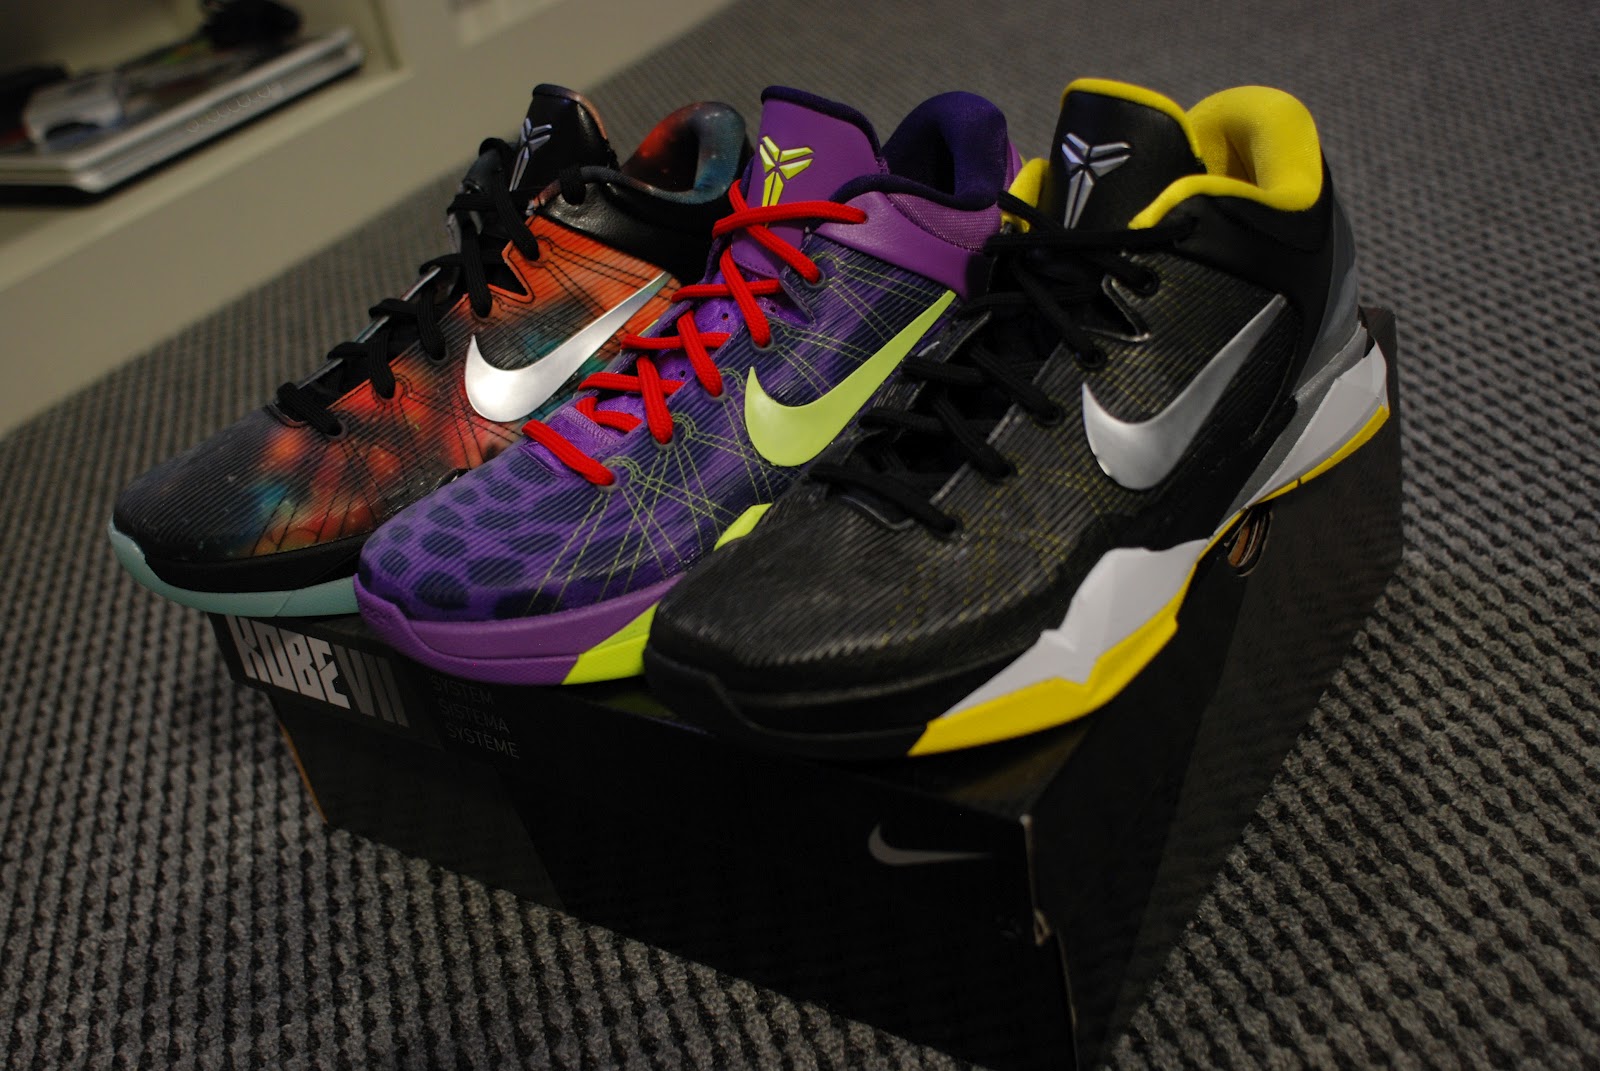 A dime bag for my thoughts: J2: Nike Kobe VII (7) System Review